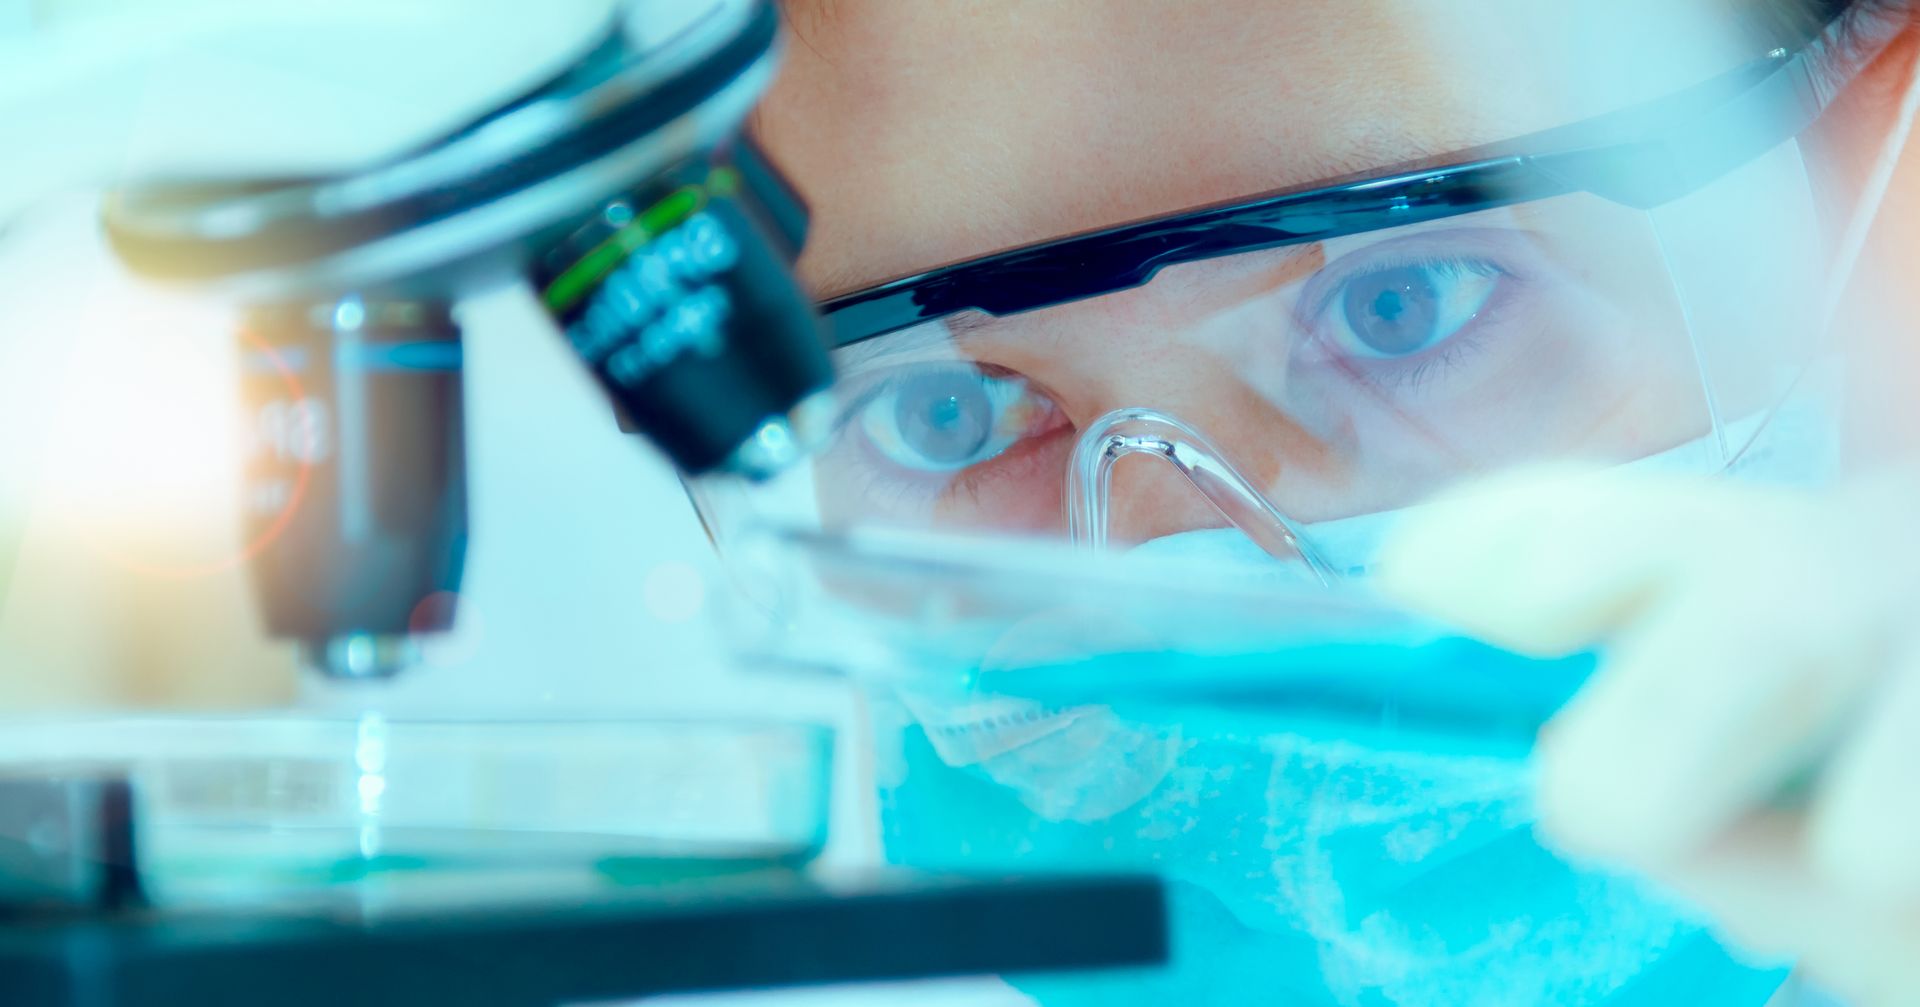 A researching person wearing protective goggles examines something with a laser.